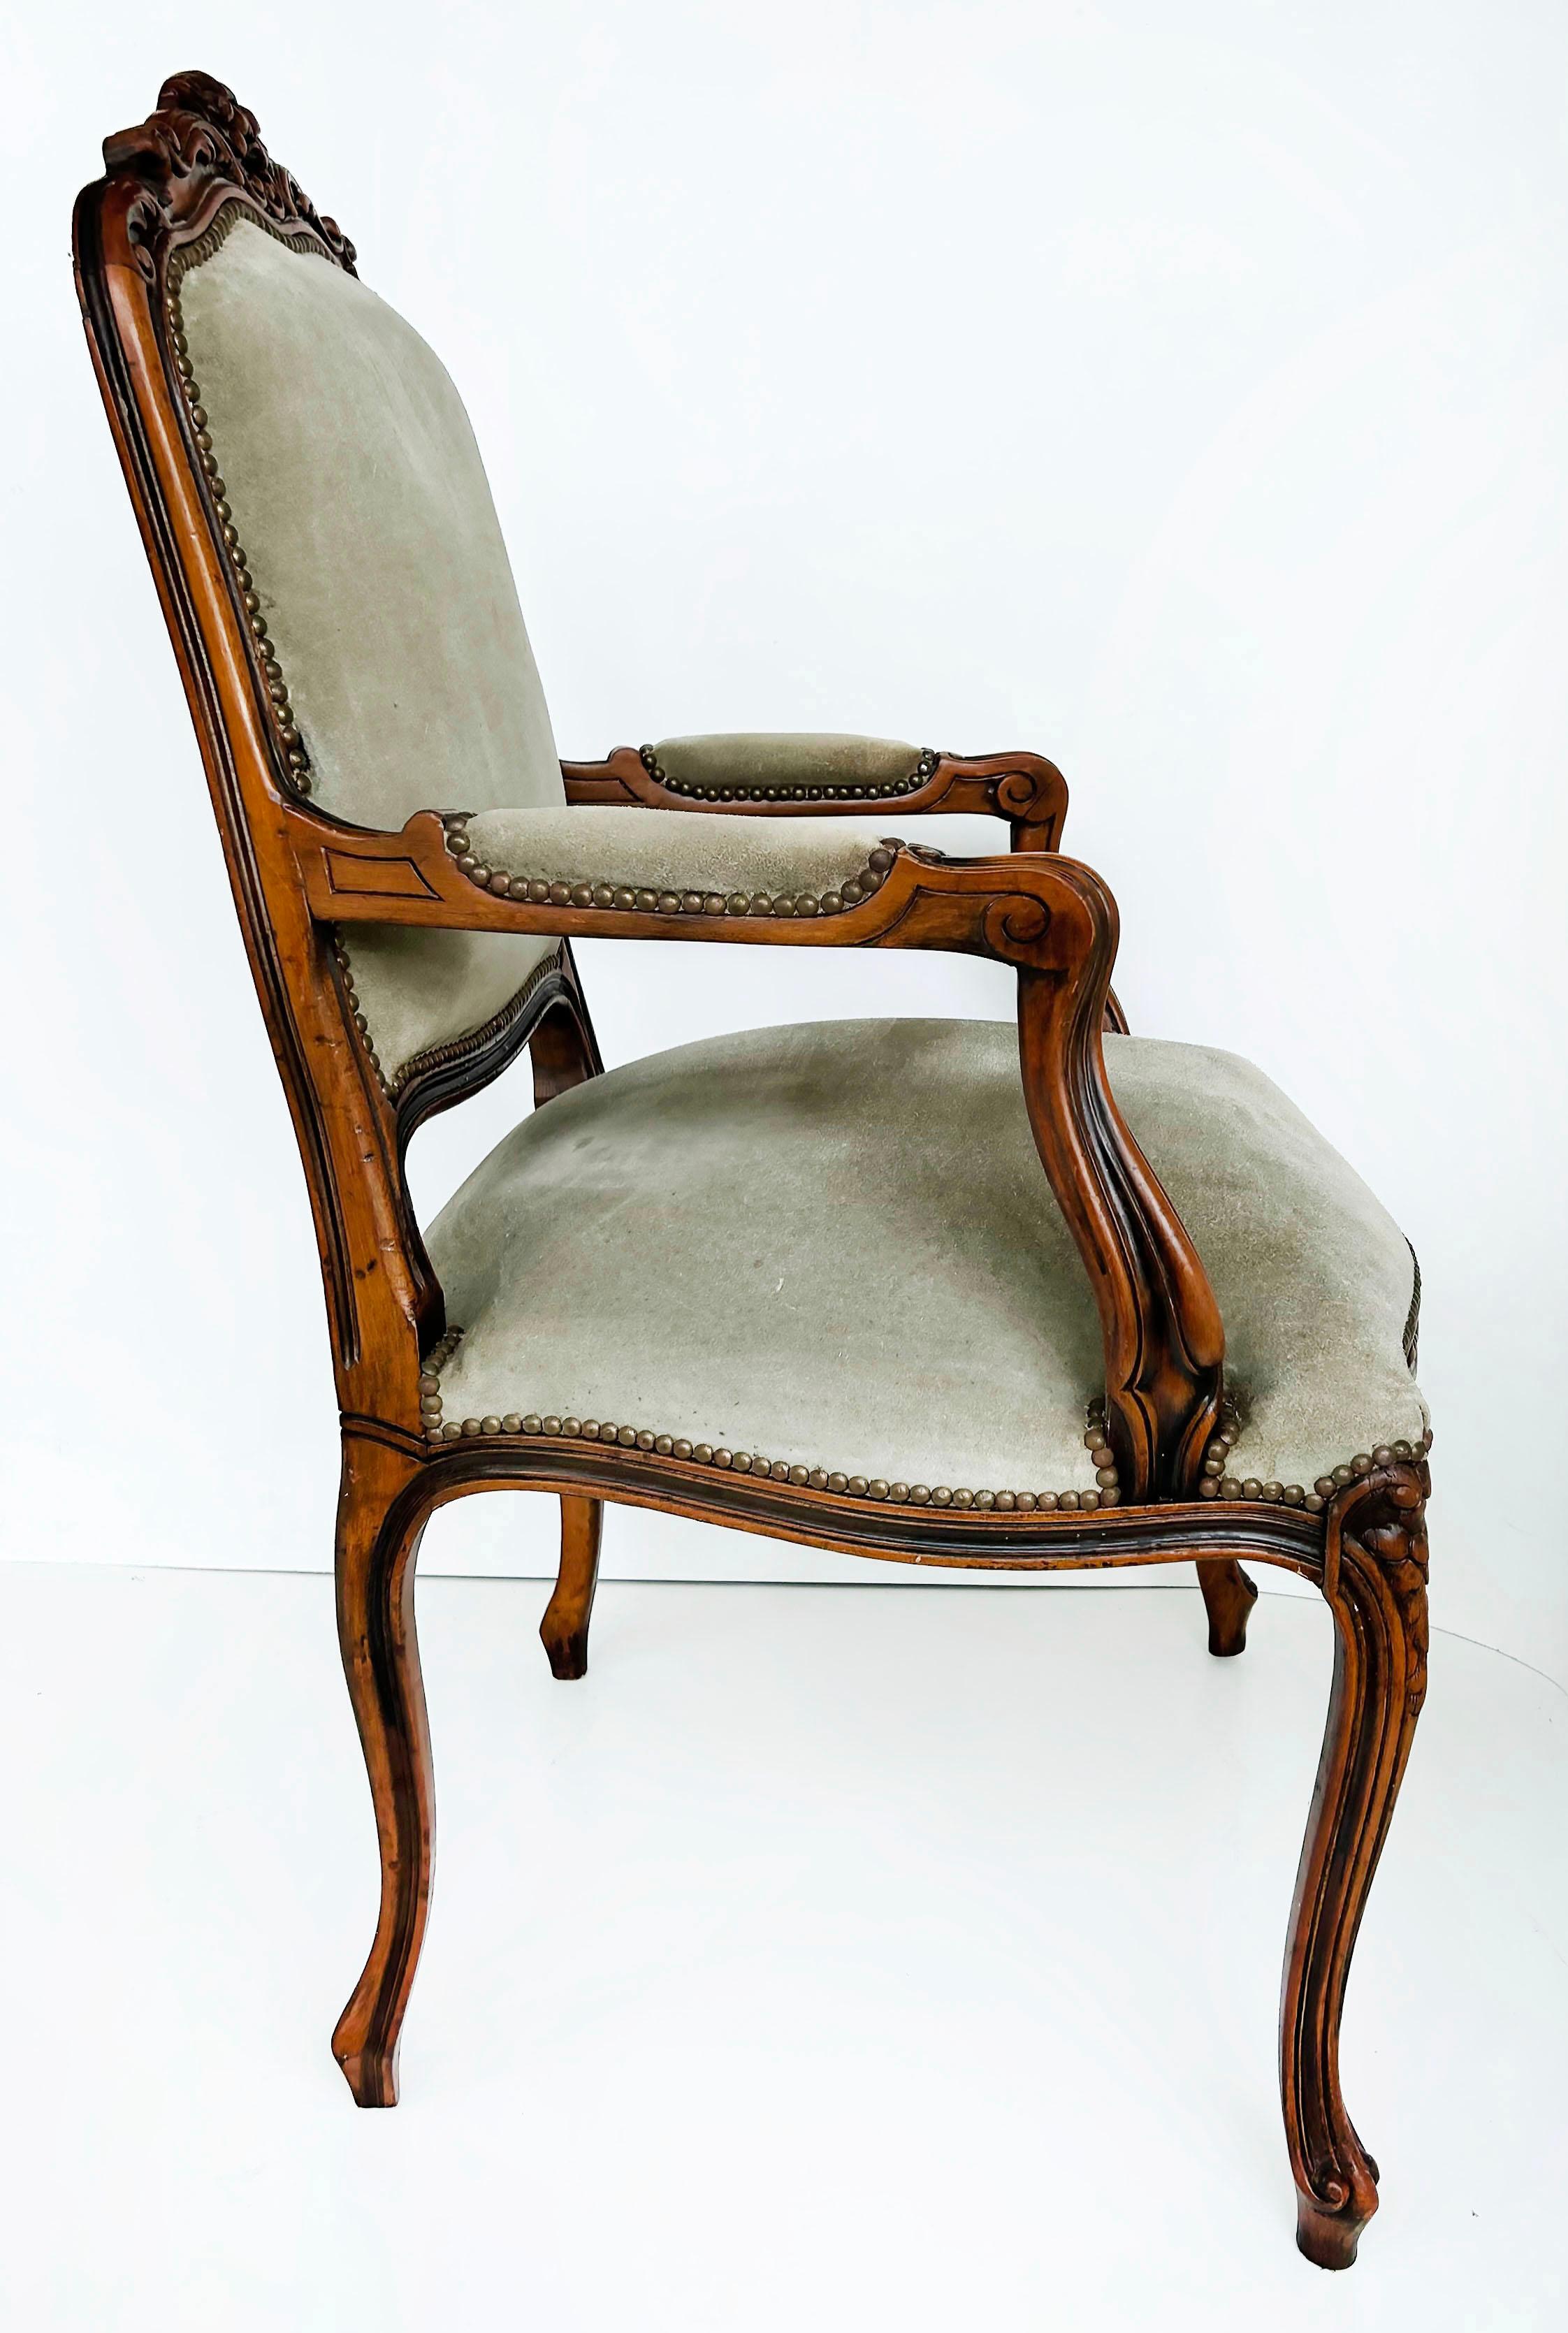 20th Century Italian Chateau d'Ax Carved Armchairs in Suede with Brass NailHeads, Pair For Sale